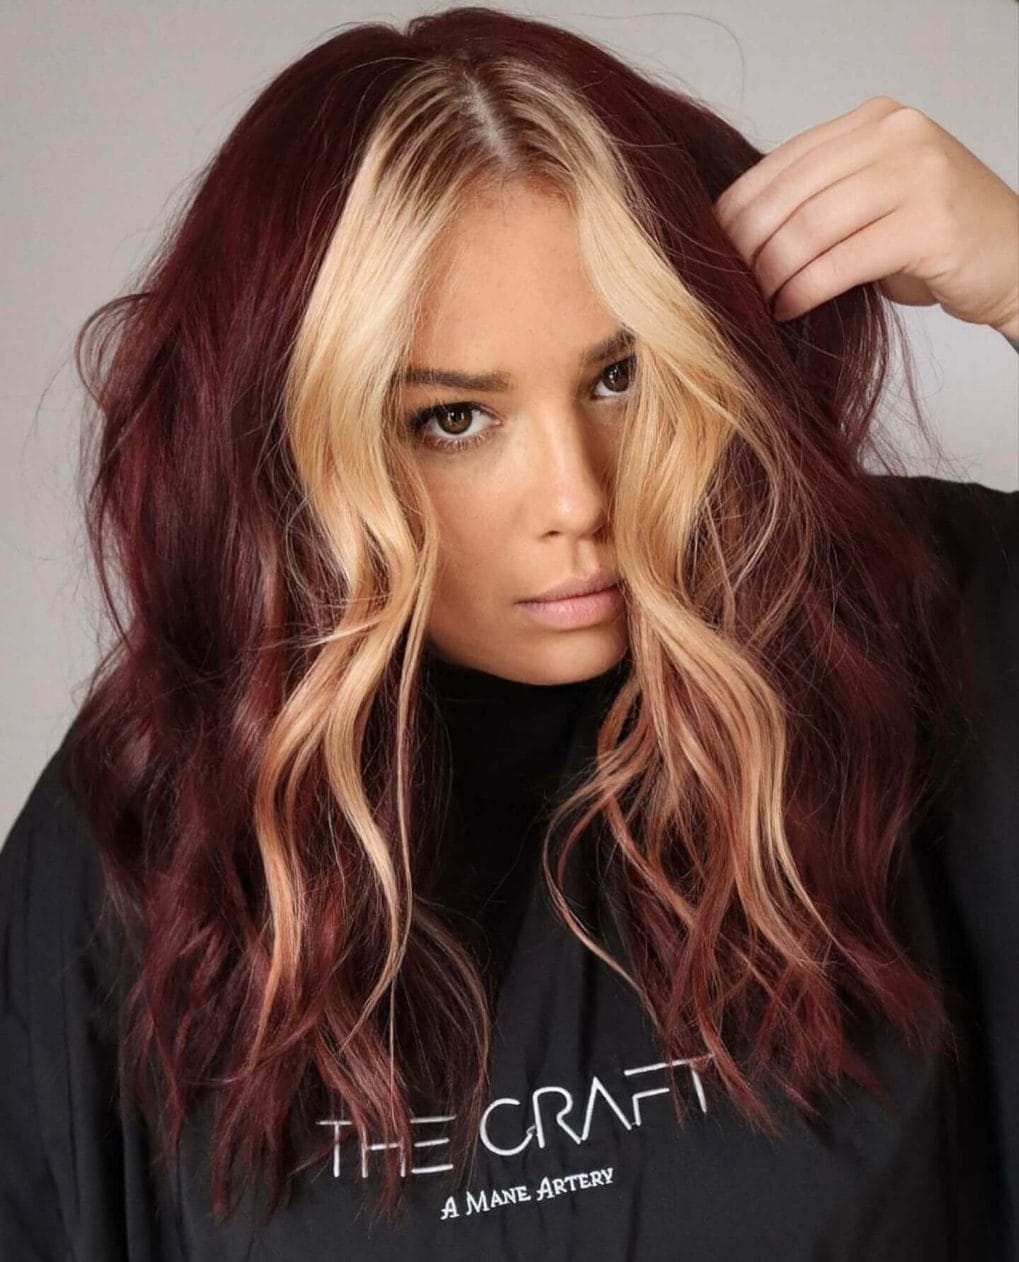 Dark roots with vibrant curled ends and bright money pieces